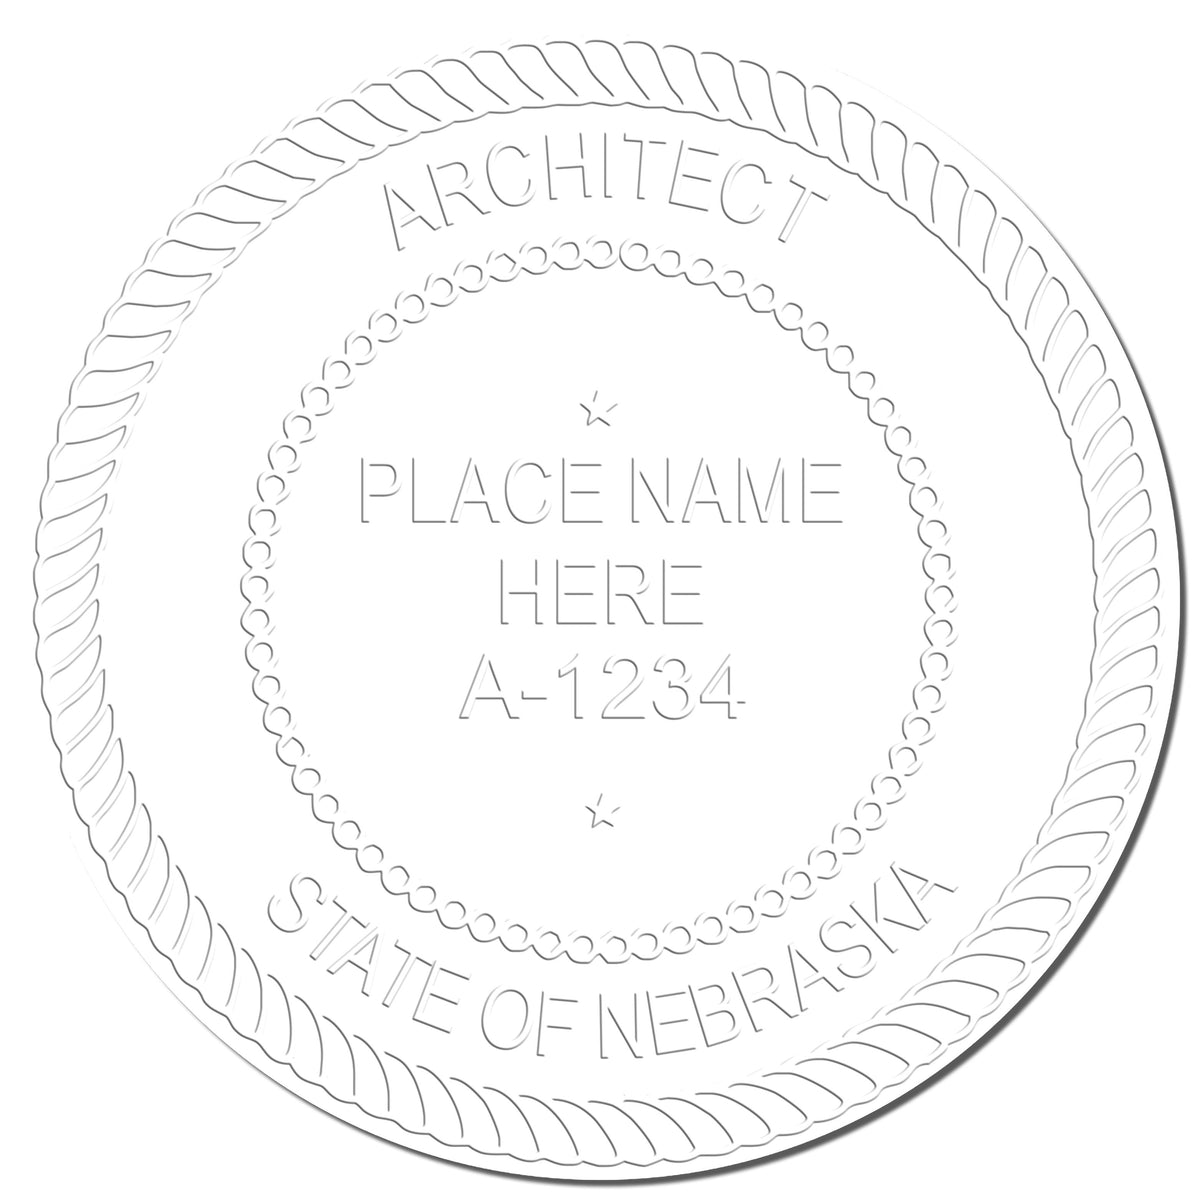 A stamped impression of the State of Nebraska Long Reach Architectural Embossing Seal in this stylish lifestyle photo, setting the tone for a unique and personalized product.